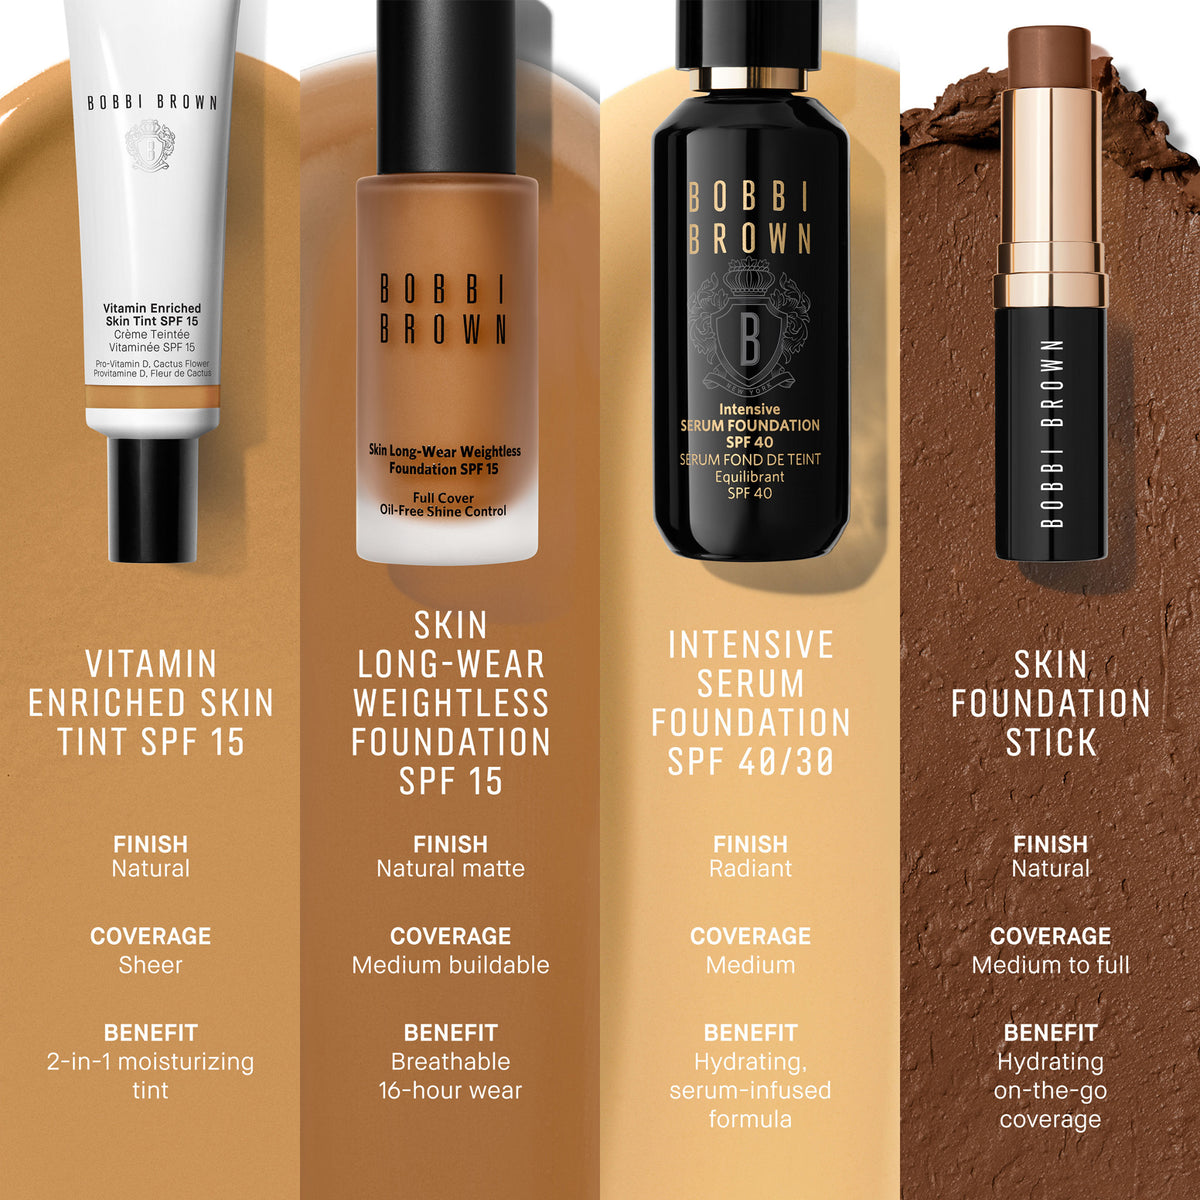 Bobbi Brown Vitamin Enriched Hydrating Skin Tint SPF 15 with Hyaluronic Acid . This product is for light complexions